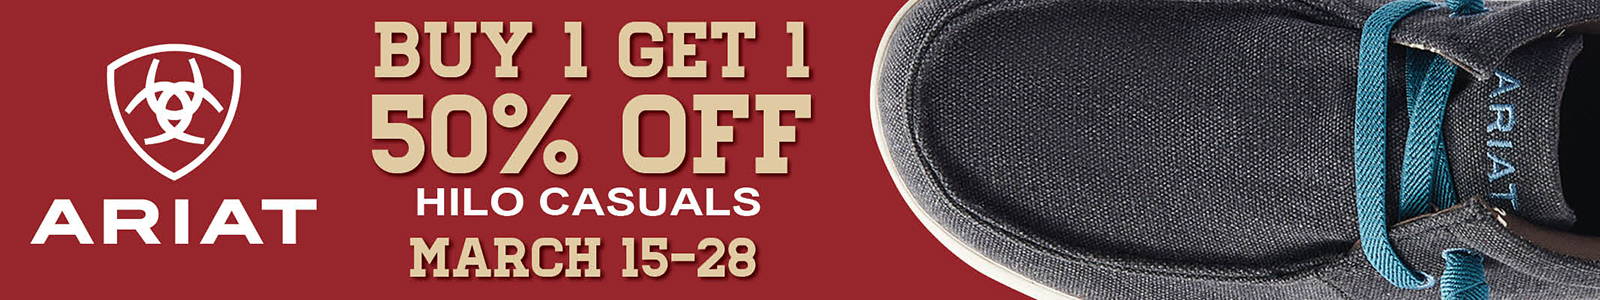 Ariat Hilo Casual Shoes Buy 1 Get 1 50% Off March 15-28